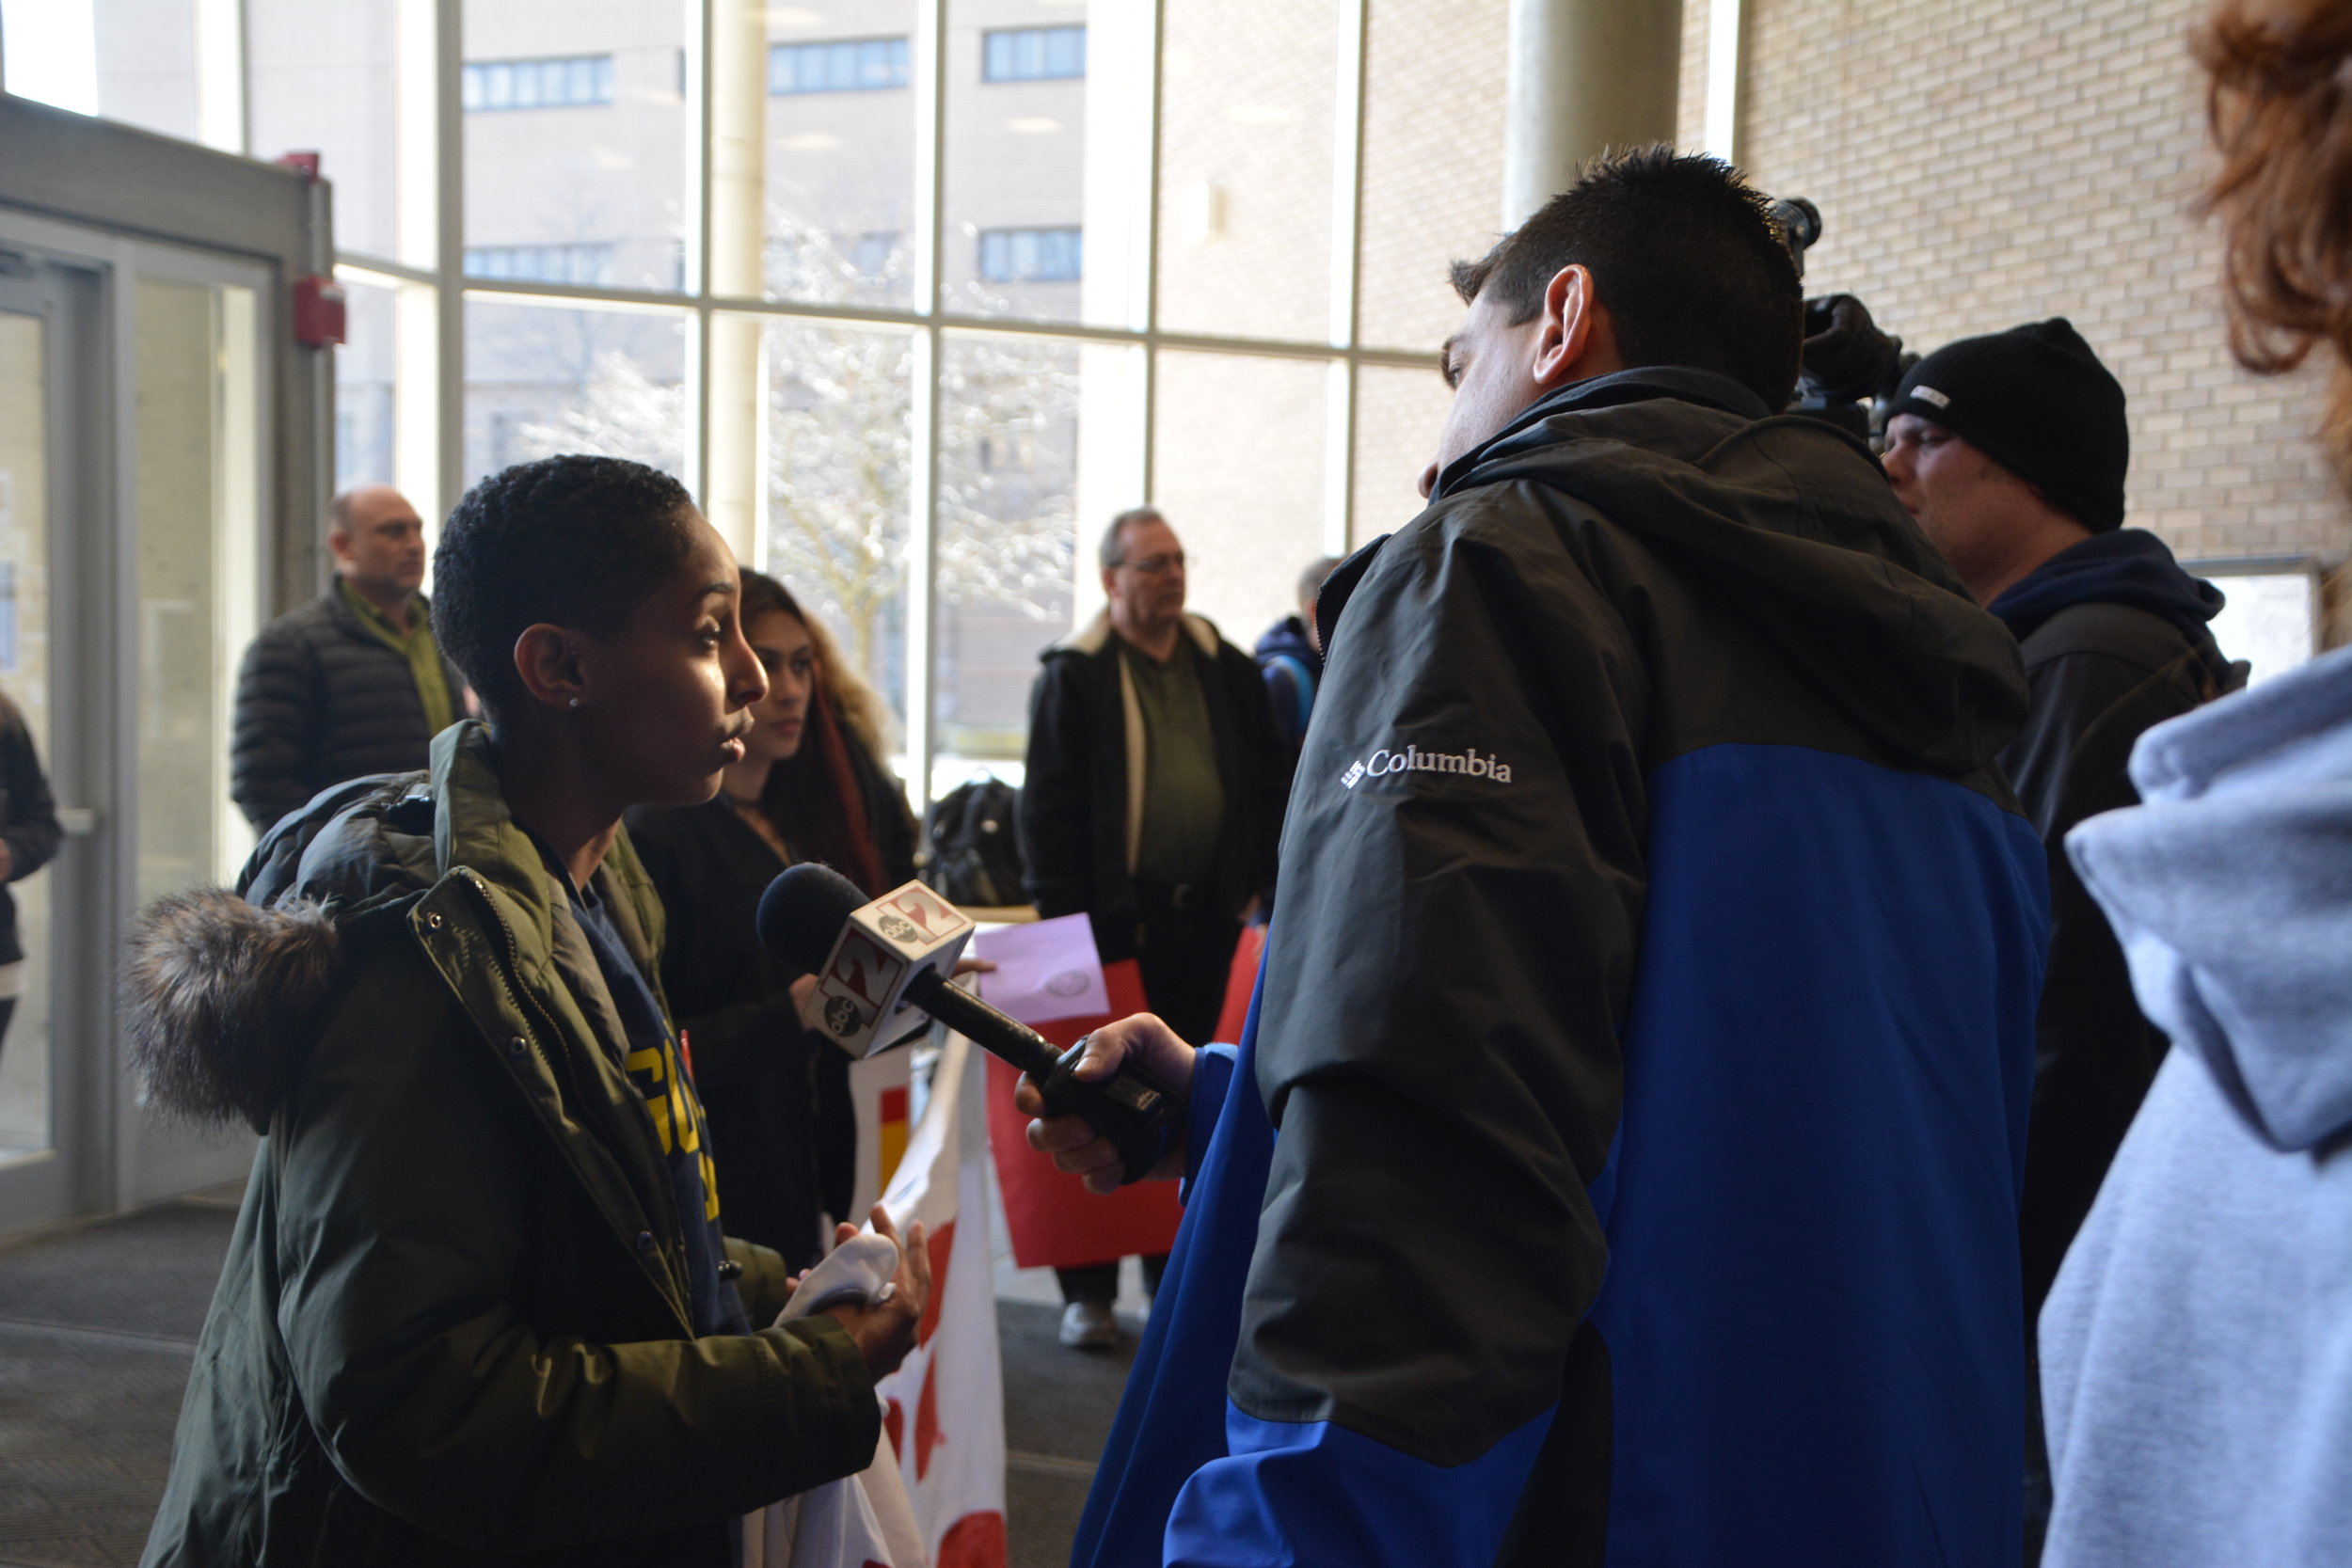  A UM Flint student ally speaks to the press about LEO contract negotiations in 2018 